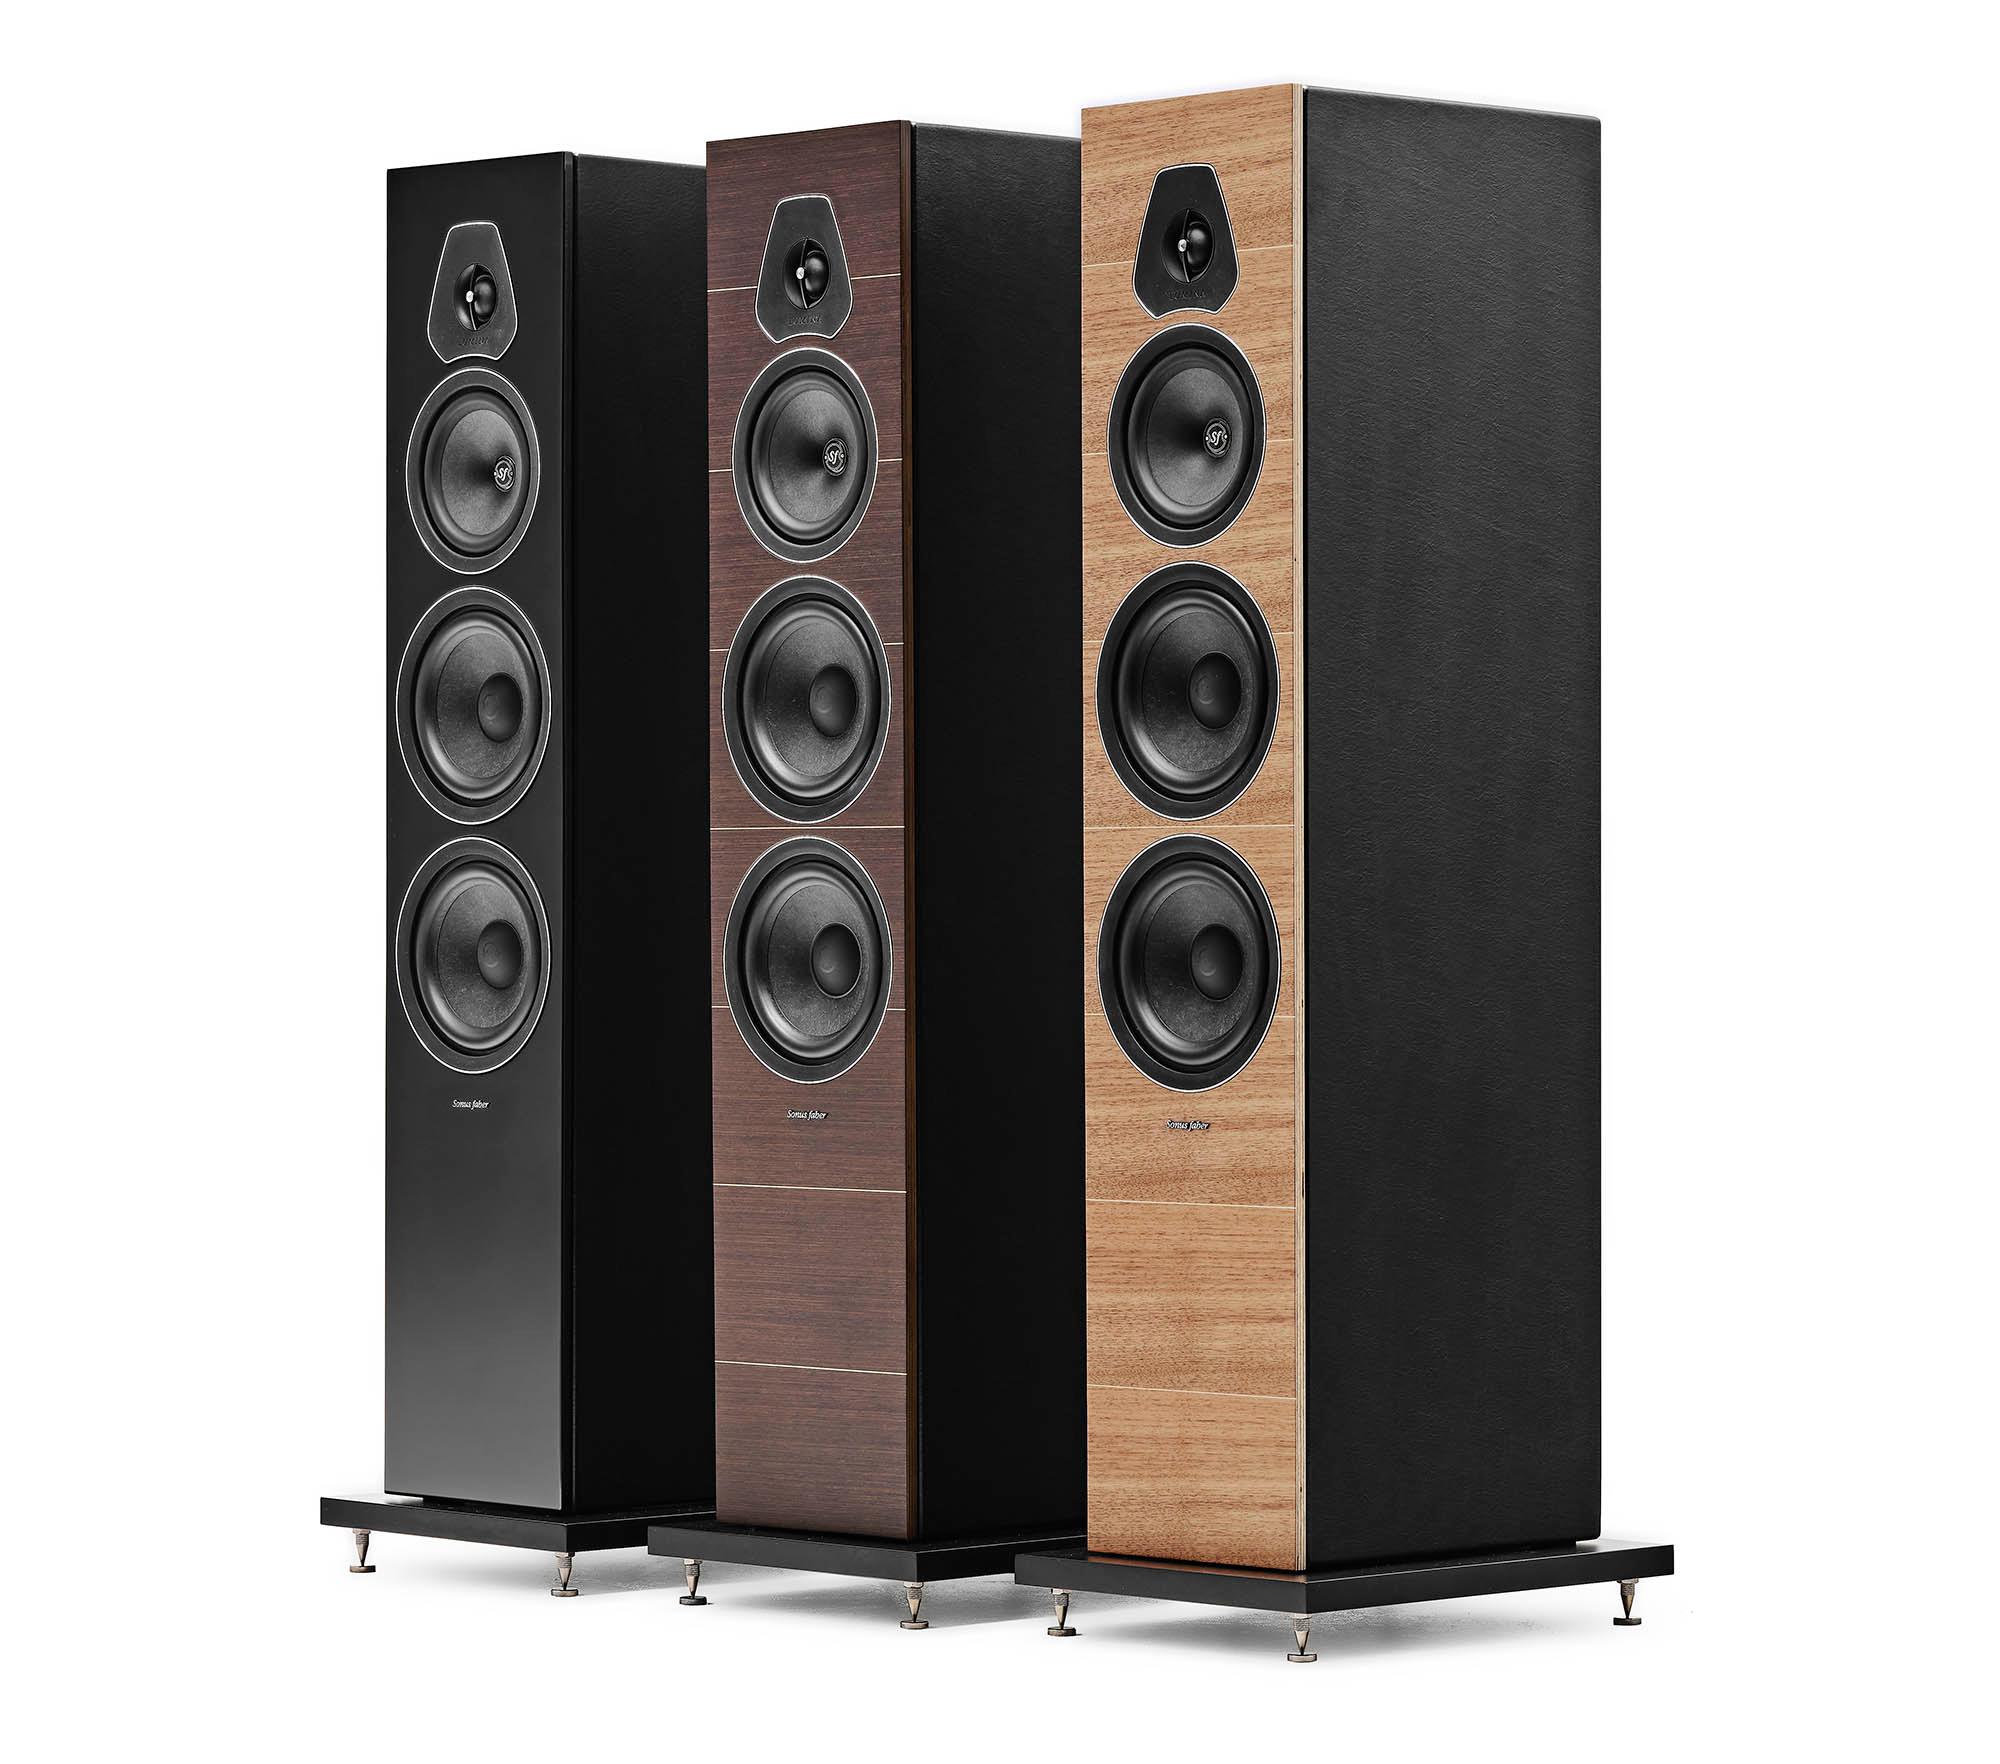 The line debuted in Fall 2020 and included two other models, as well as a center channel speaker option. e92880bf lumina v